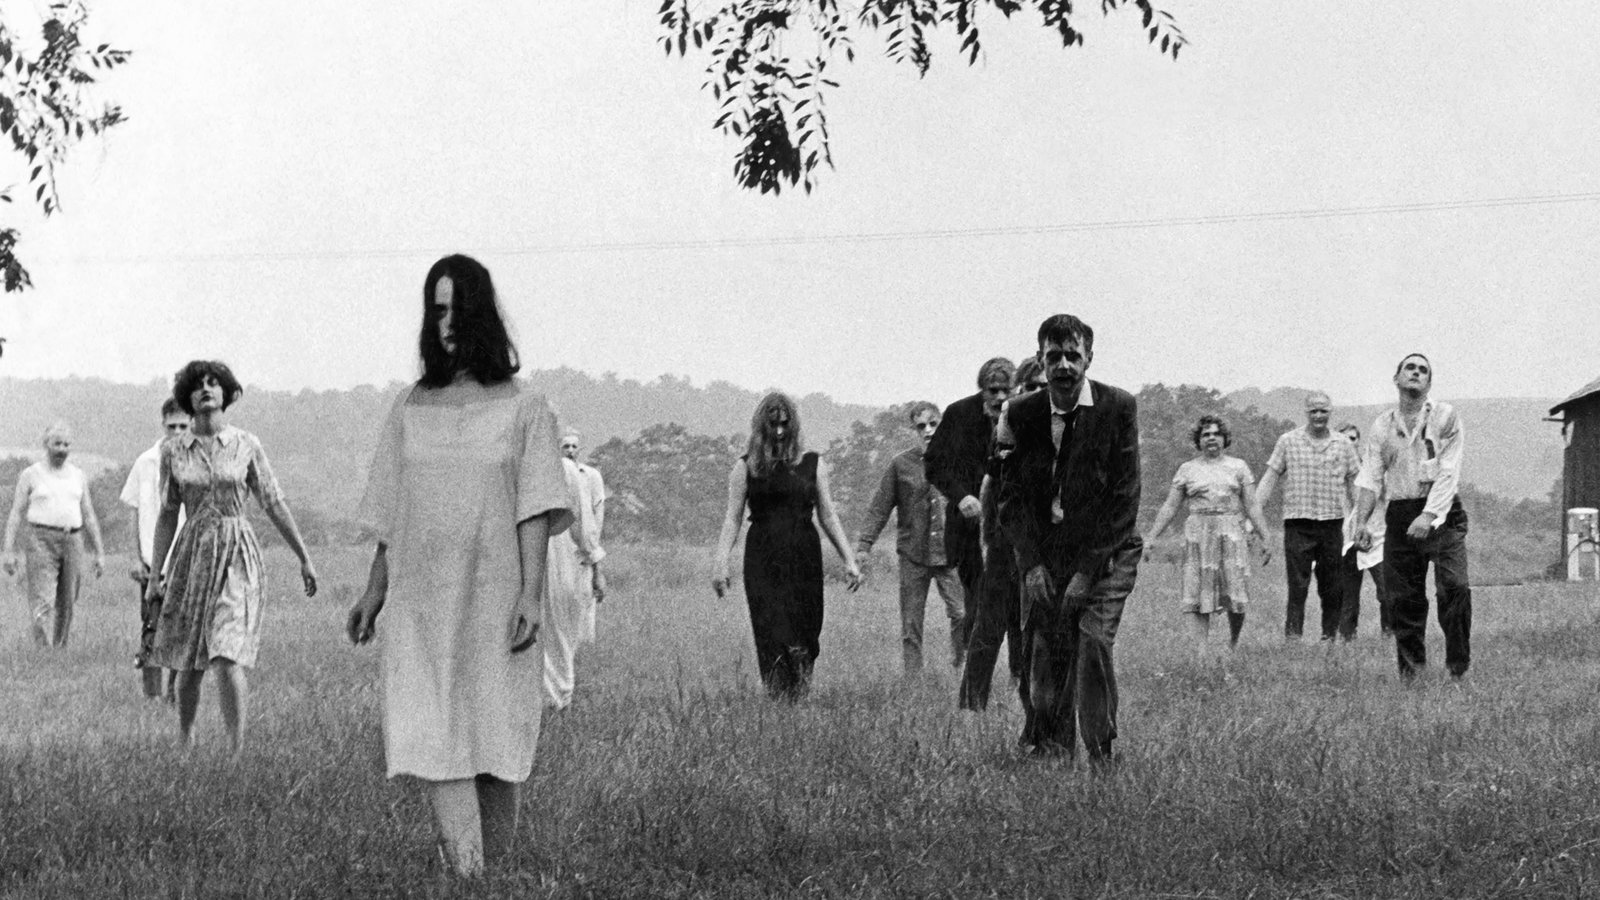 Flesh-eating zombies roam the Pennsylvania countryside in ‘Night of the Living Dead.’